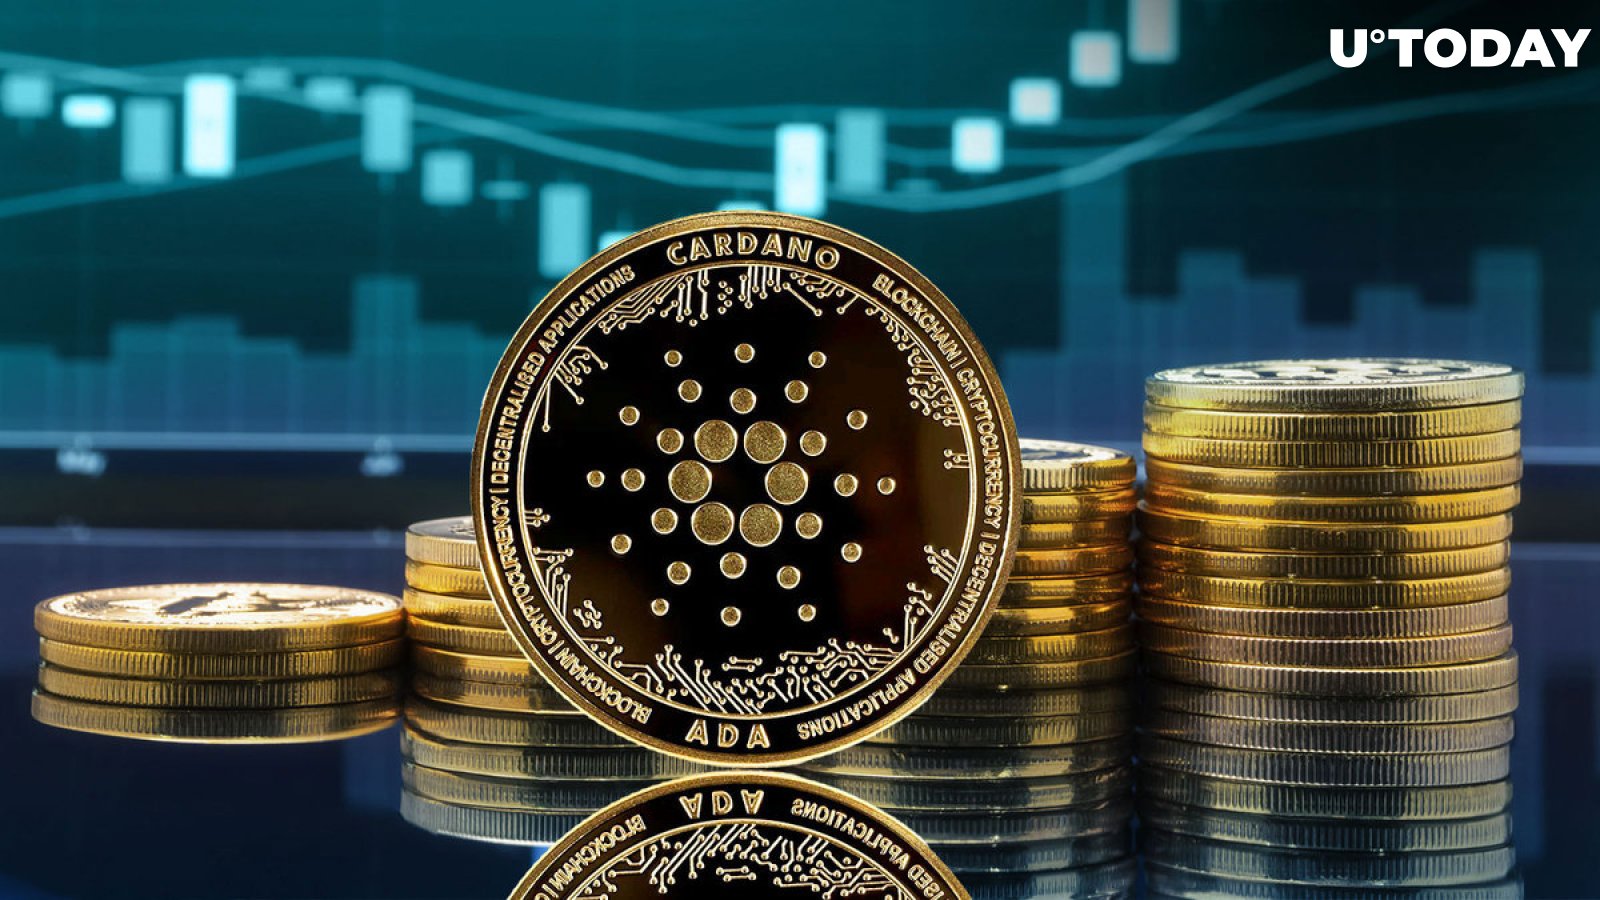 Cardano Skyrockets 673% as Stablecoin Value Jumps in Exciting Q4 Performance